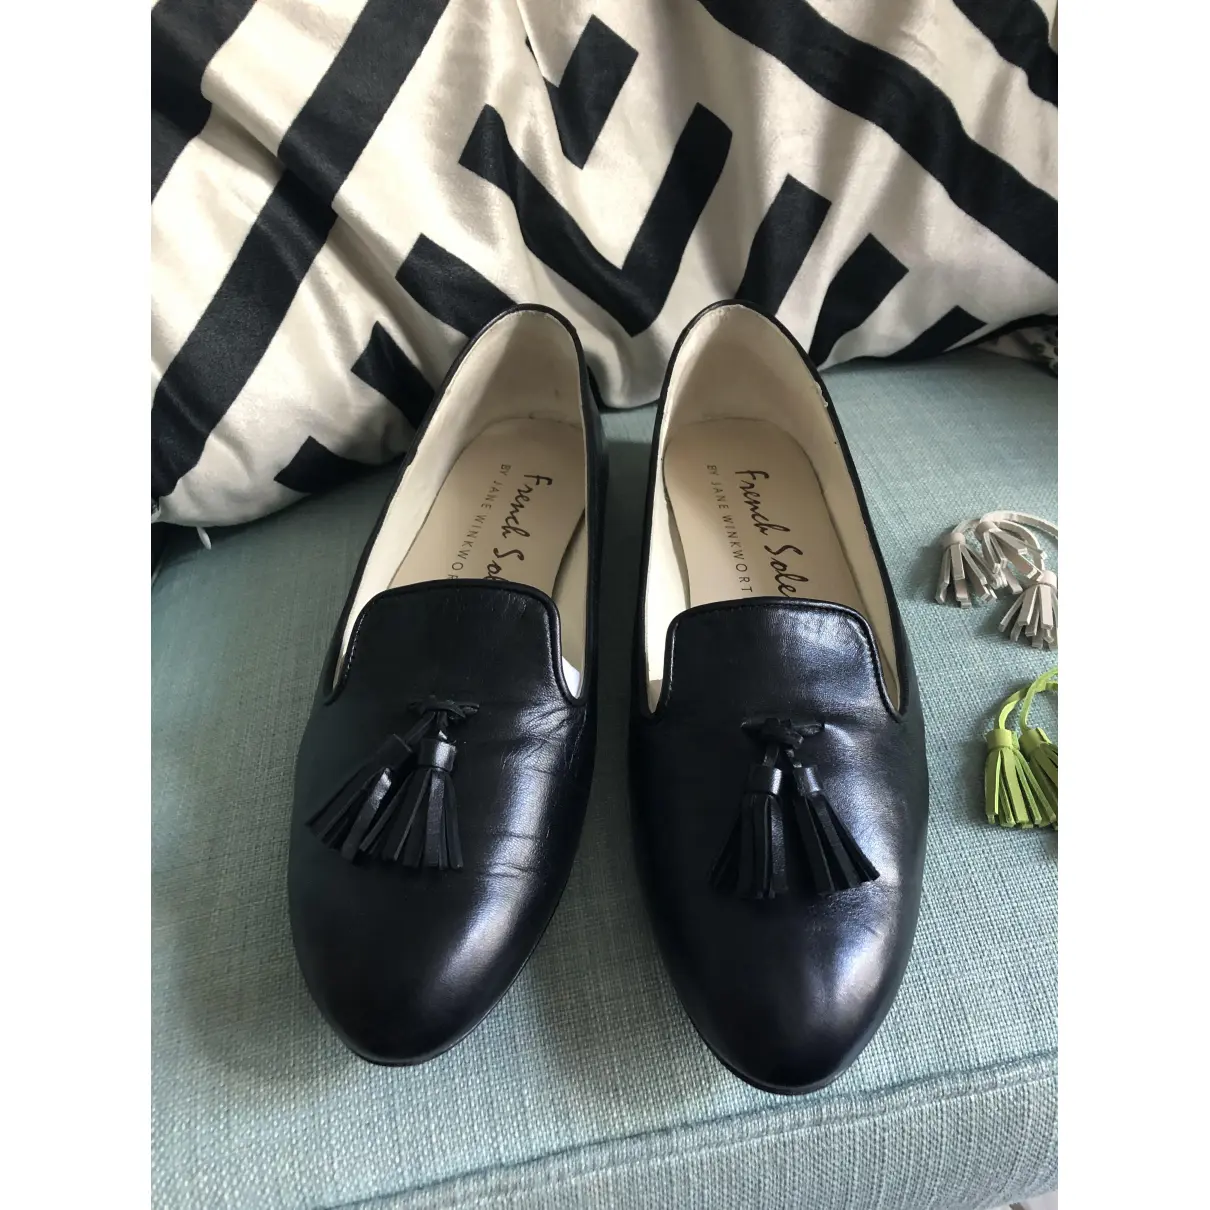 Buy French Sole Leather flats online